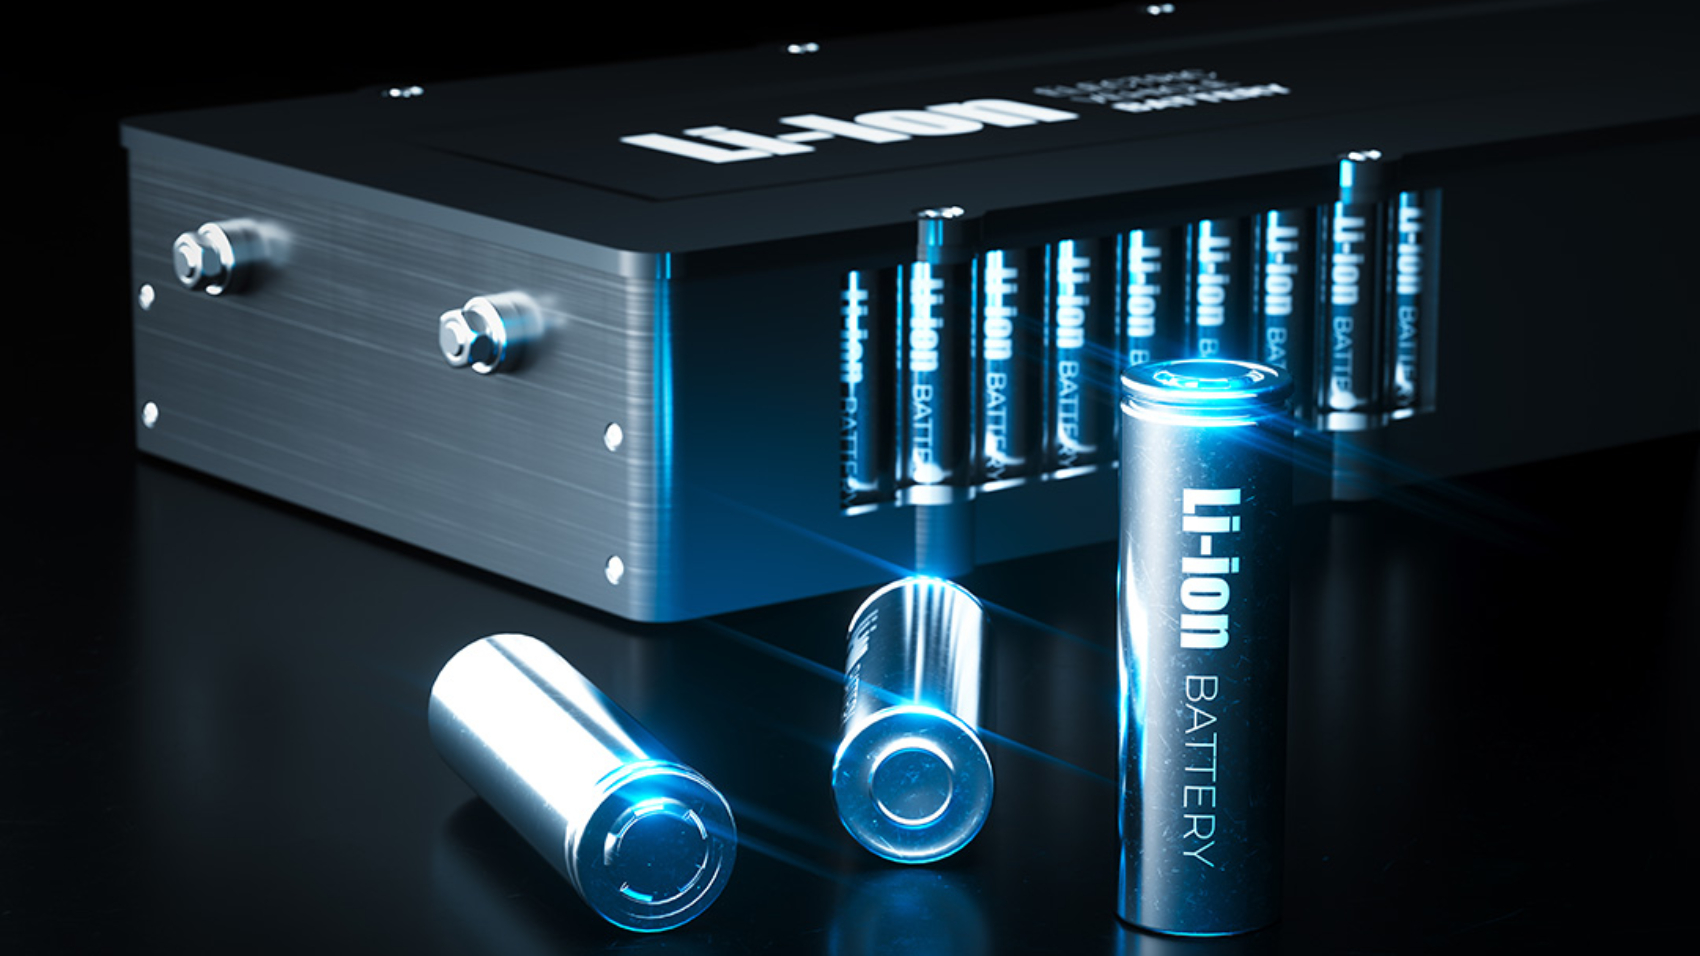 Modern lithium ion battery technology concept. Metal Li-Ion battery cells with electric vehicle battery pack on black background. 3d illustration.